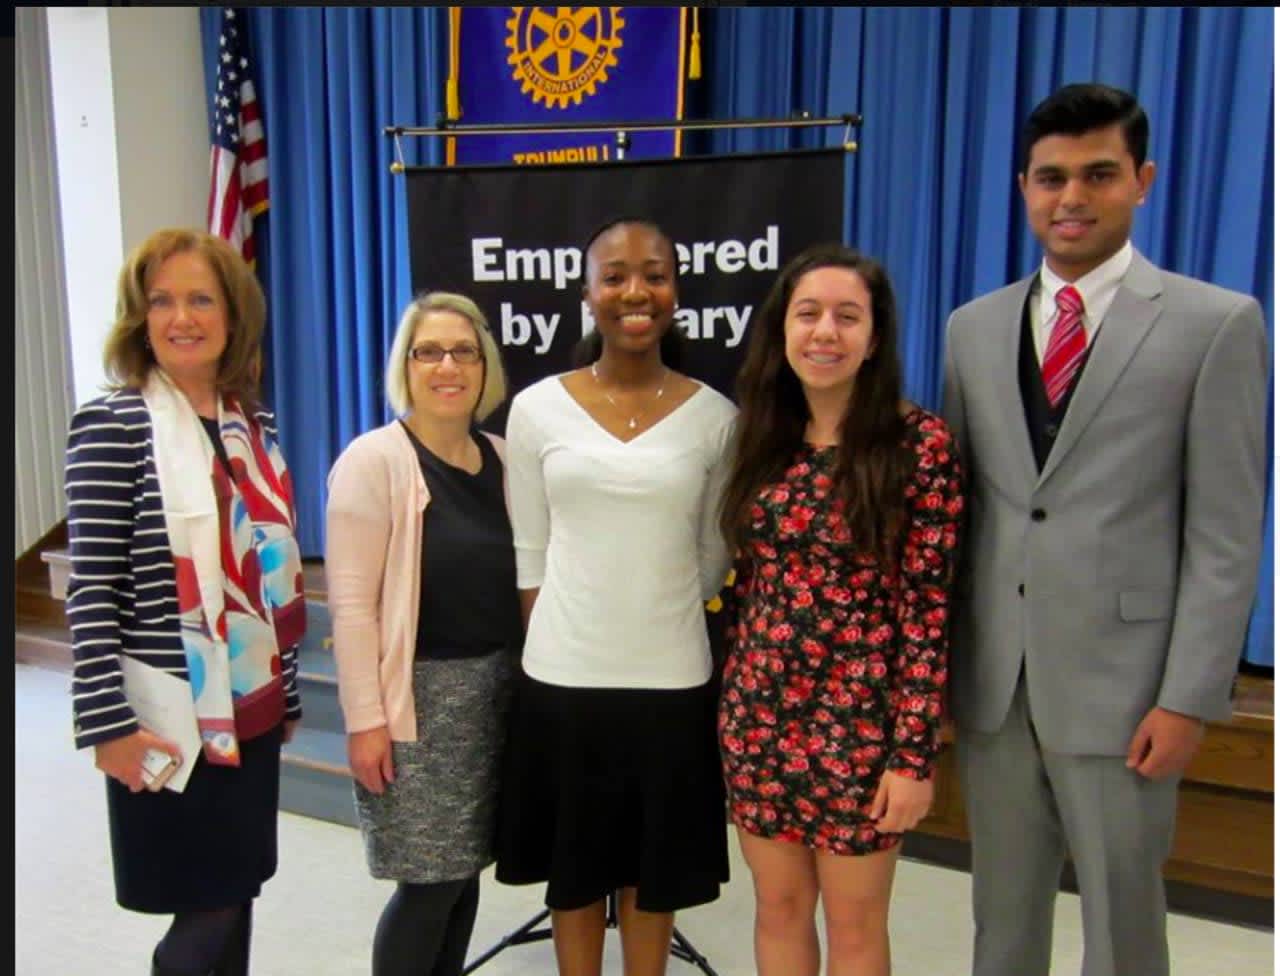 Winners of the Trumbull Rotary 4 Way Test Speech Contest are First Place, Danielle Cross; Second Place, Julia Esposito; and Third Place, Anush Sureshbabu